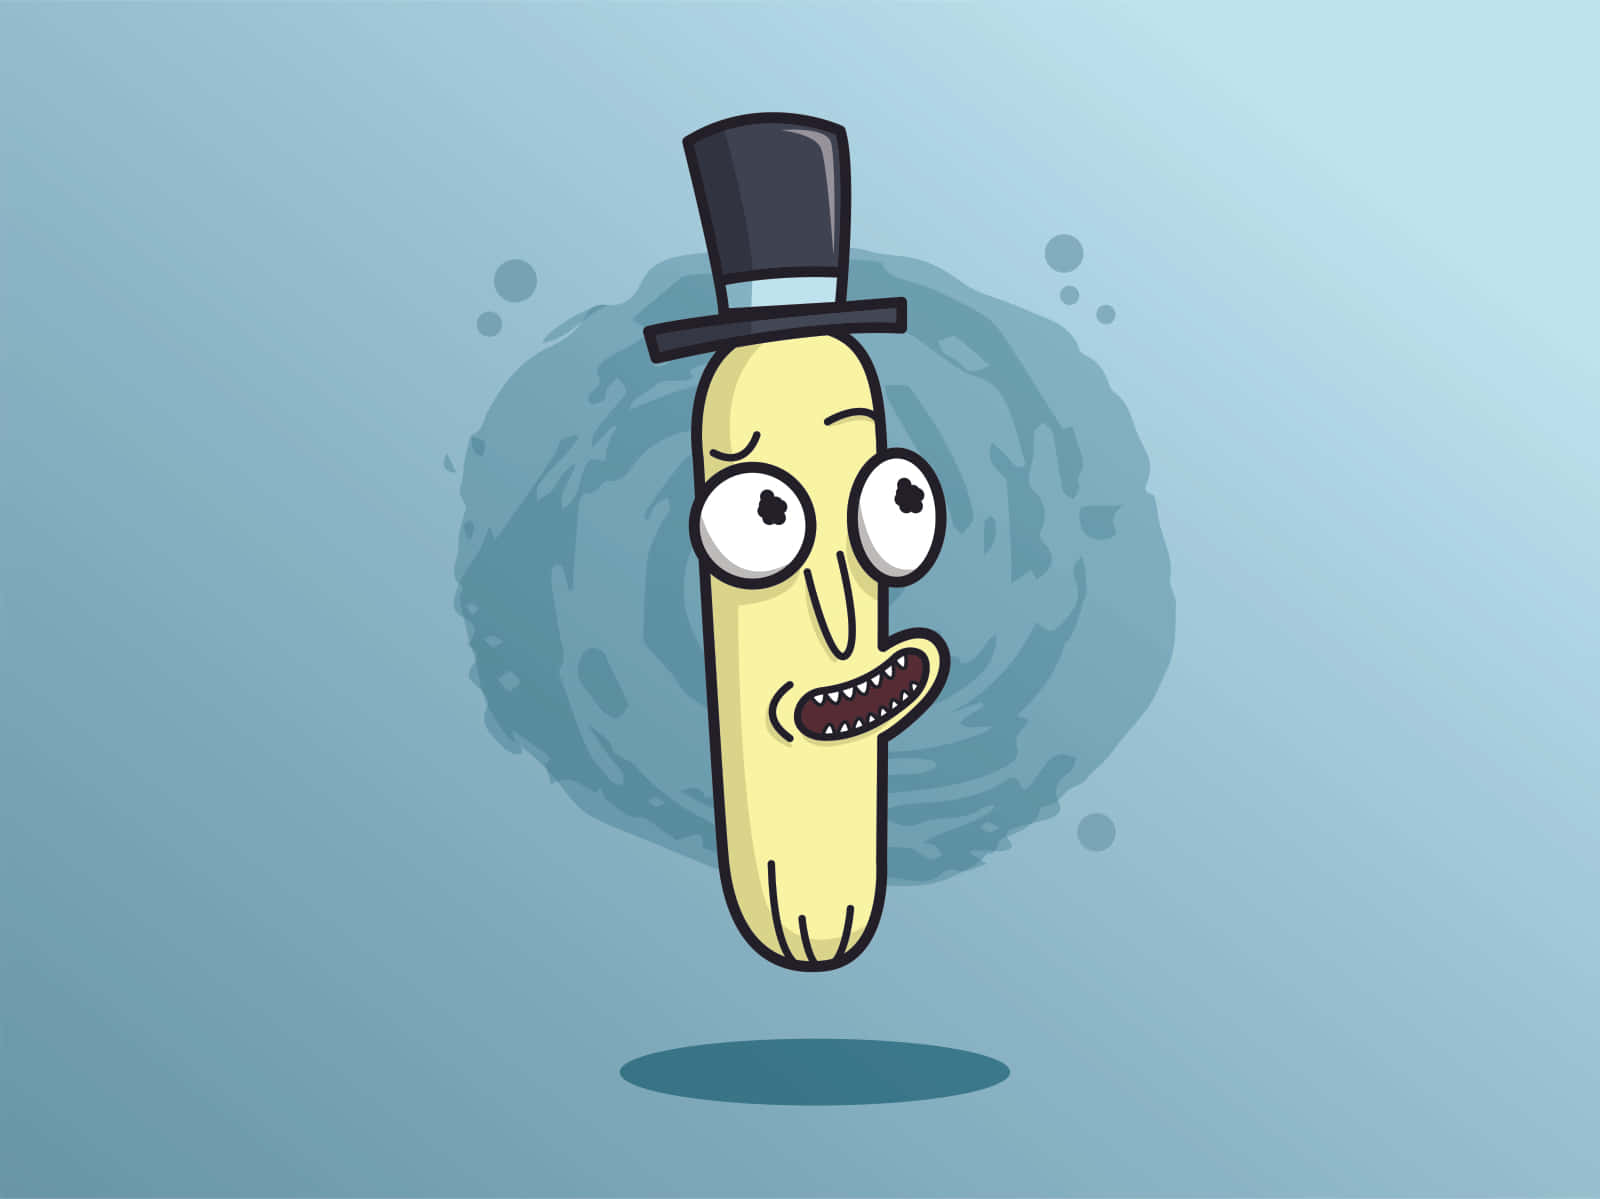 Mr. Poopybutthole in his whimsical universe Wallpaper